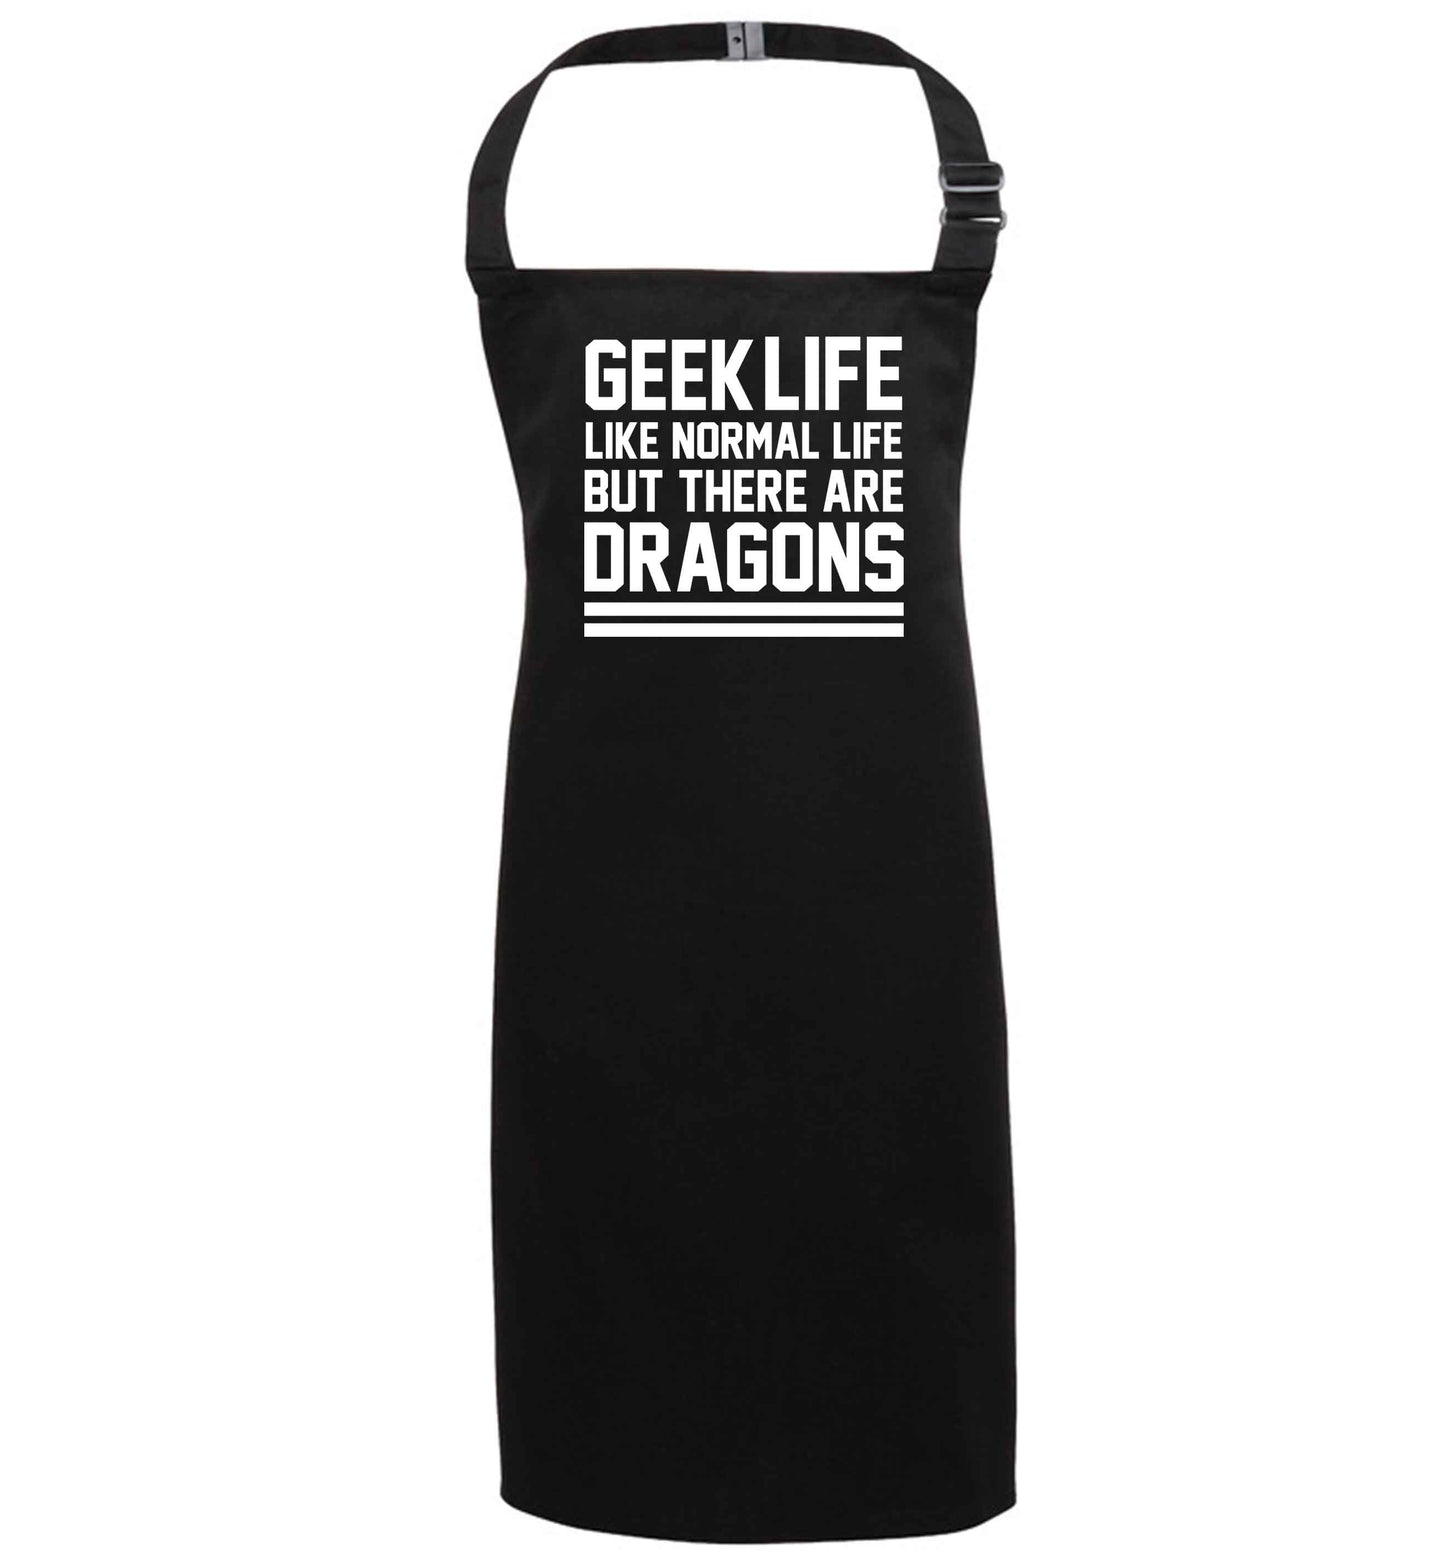 Geek life like normal life but there are dragons black apron 7-10 years